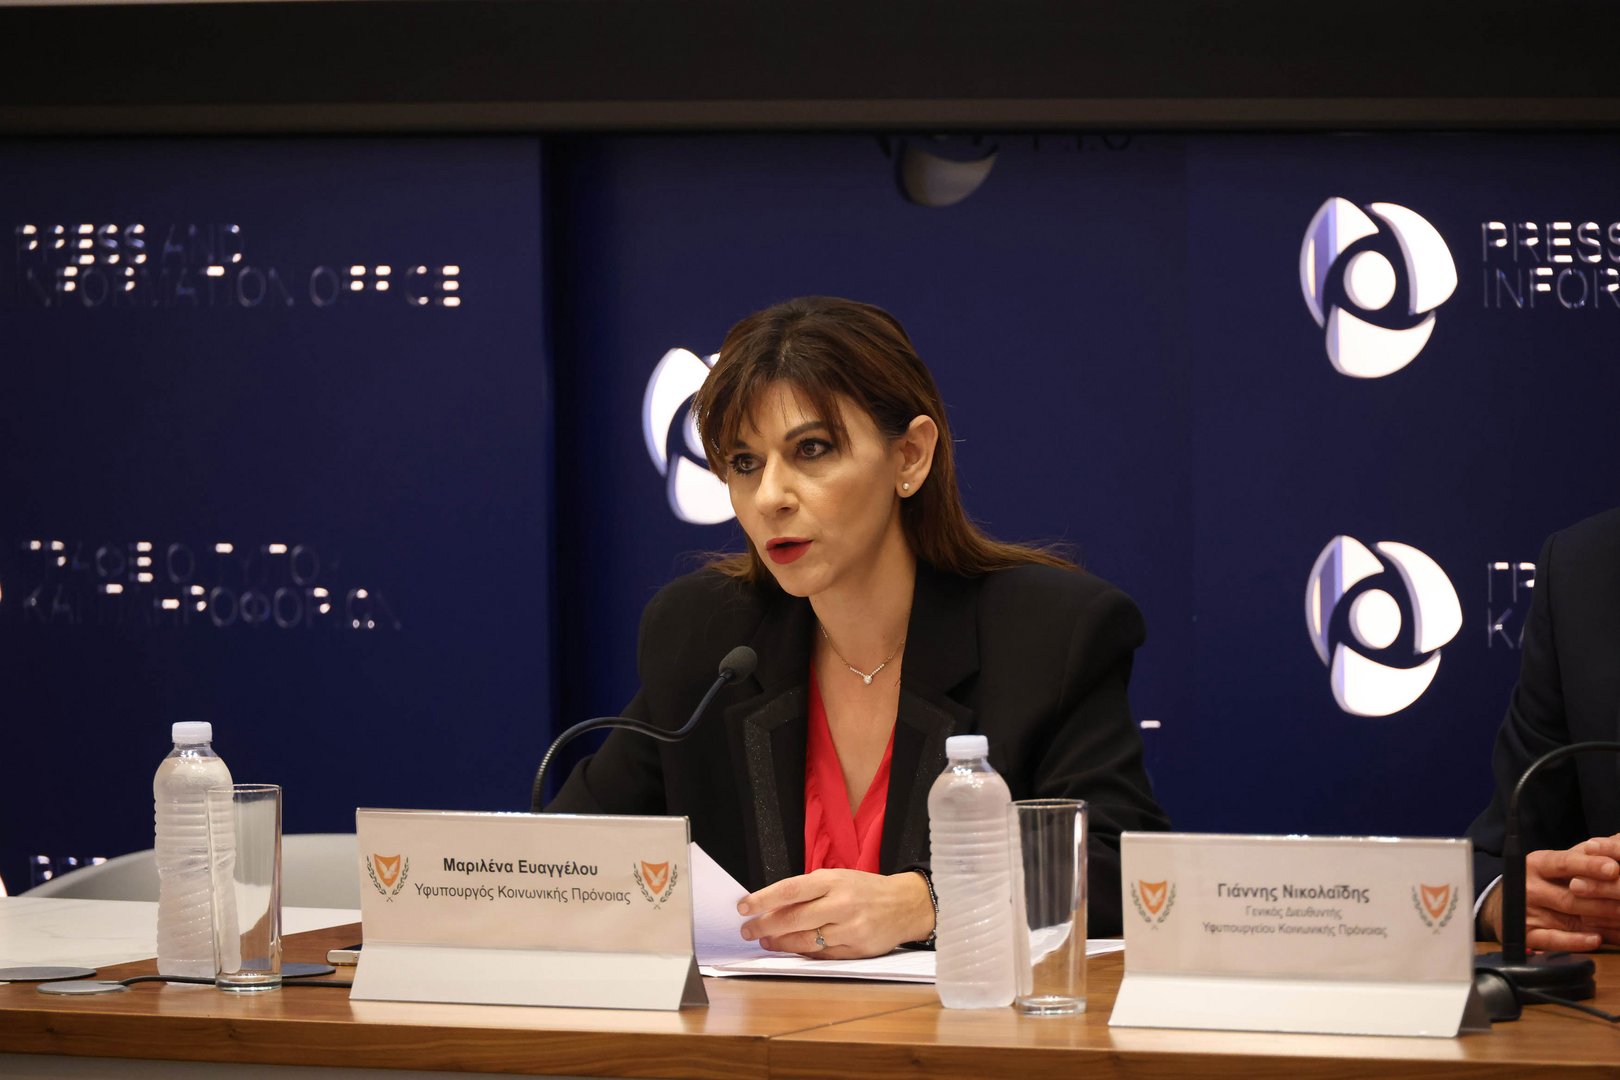 image Evangelou discusses investments in society at EU meeting